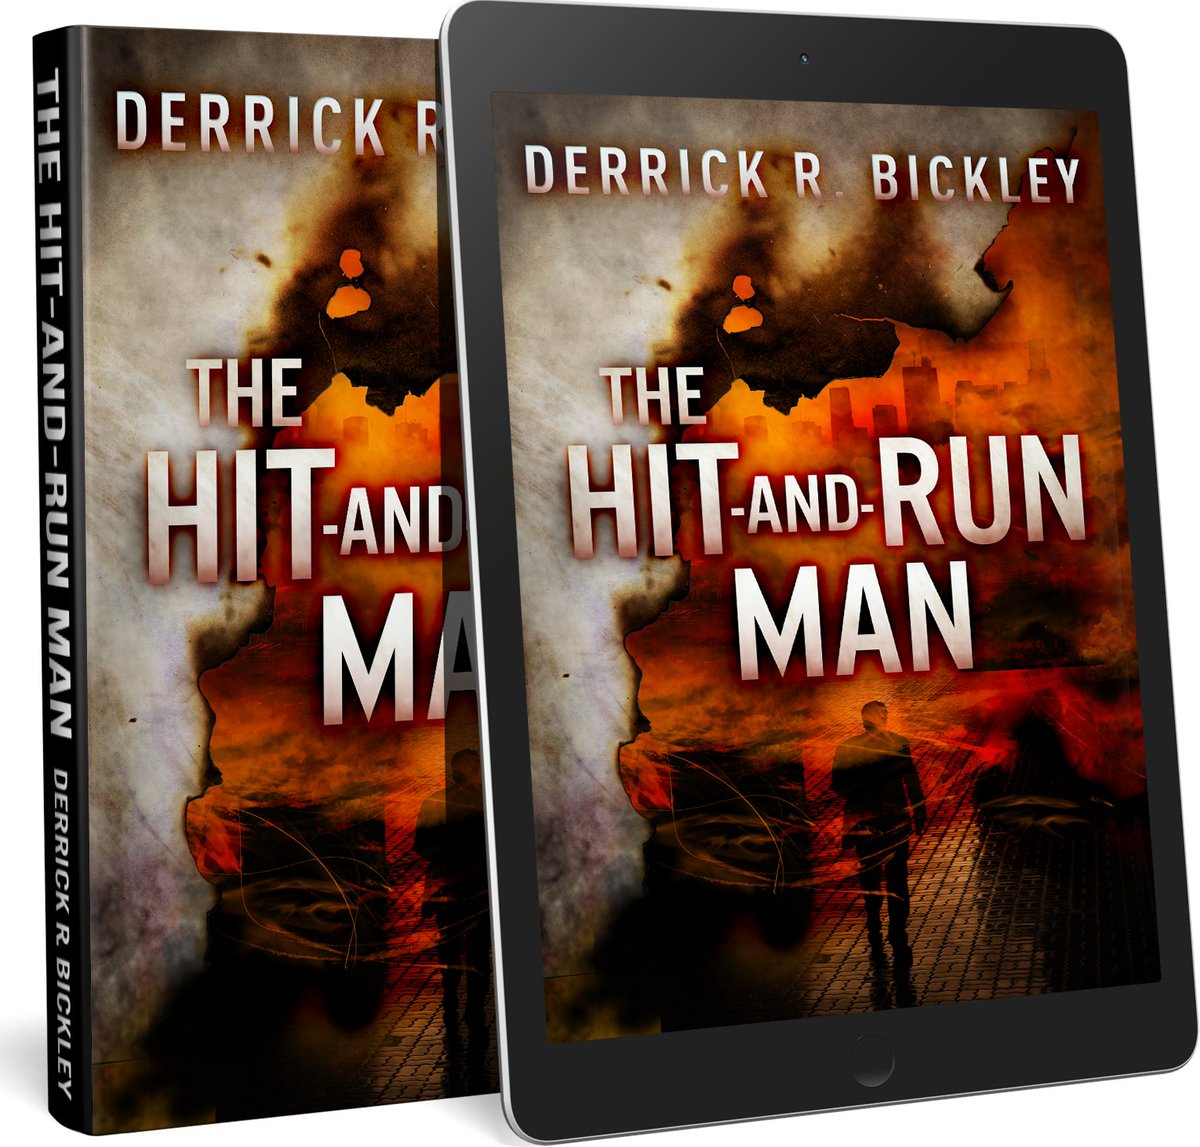 'On the edge of your seat until the very last page' mybook.to/TheHitAndRunMan THE HIT-AND-RUN MAN on #Kindle or your favourite digital store PAPERBACK HARDBACK (Amzn inc L/Print B&N inc L/Print Wmart) AUDIOBOOK #crimethrillers #NextChapterPub #mustread #crime #pageturners